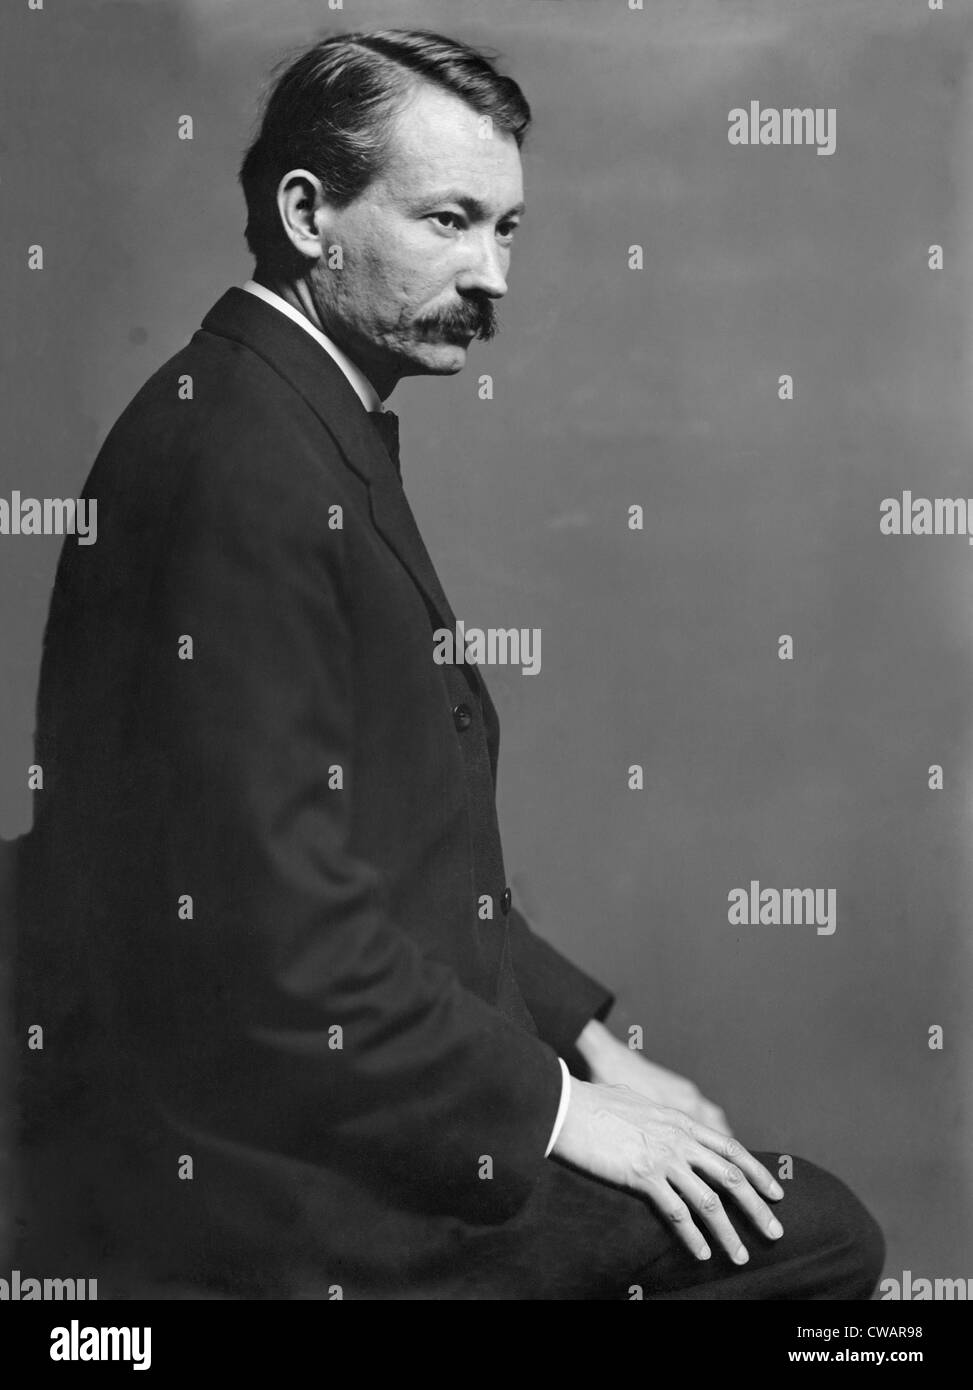 Robert Henri (1865-1929), the American painter, posed in the Gertrude Kasebier's New York City studio in 1900.  Henri was a Stock Photo